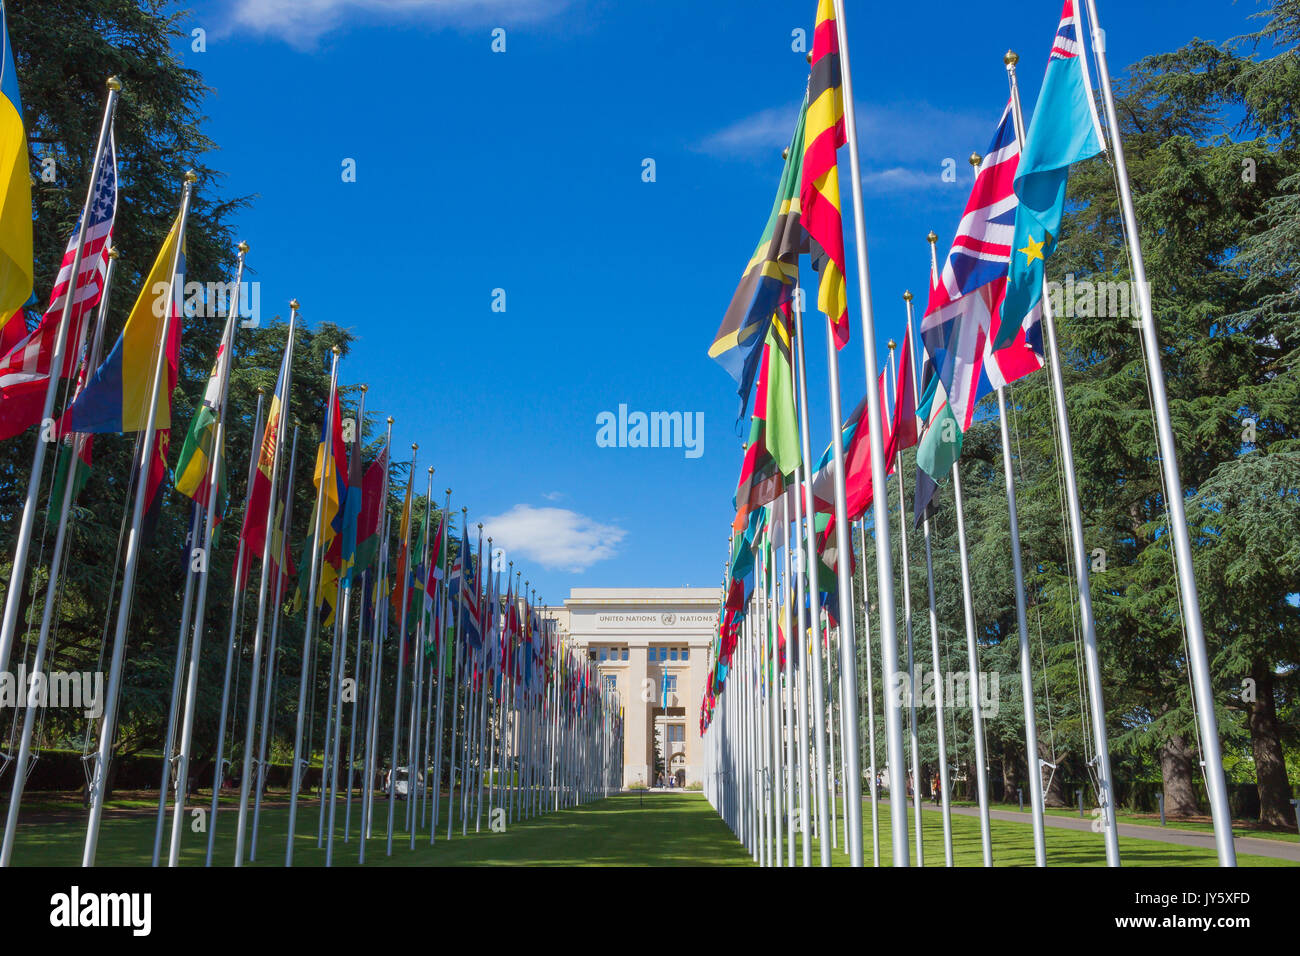 Gallery of national flags Stock Photo